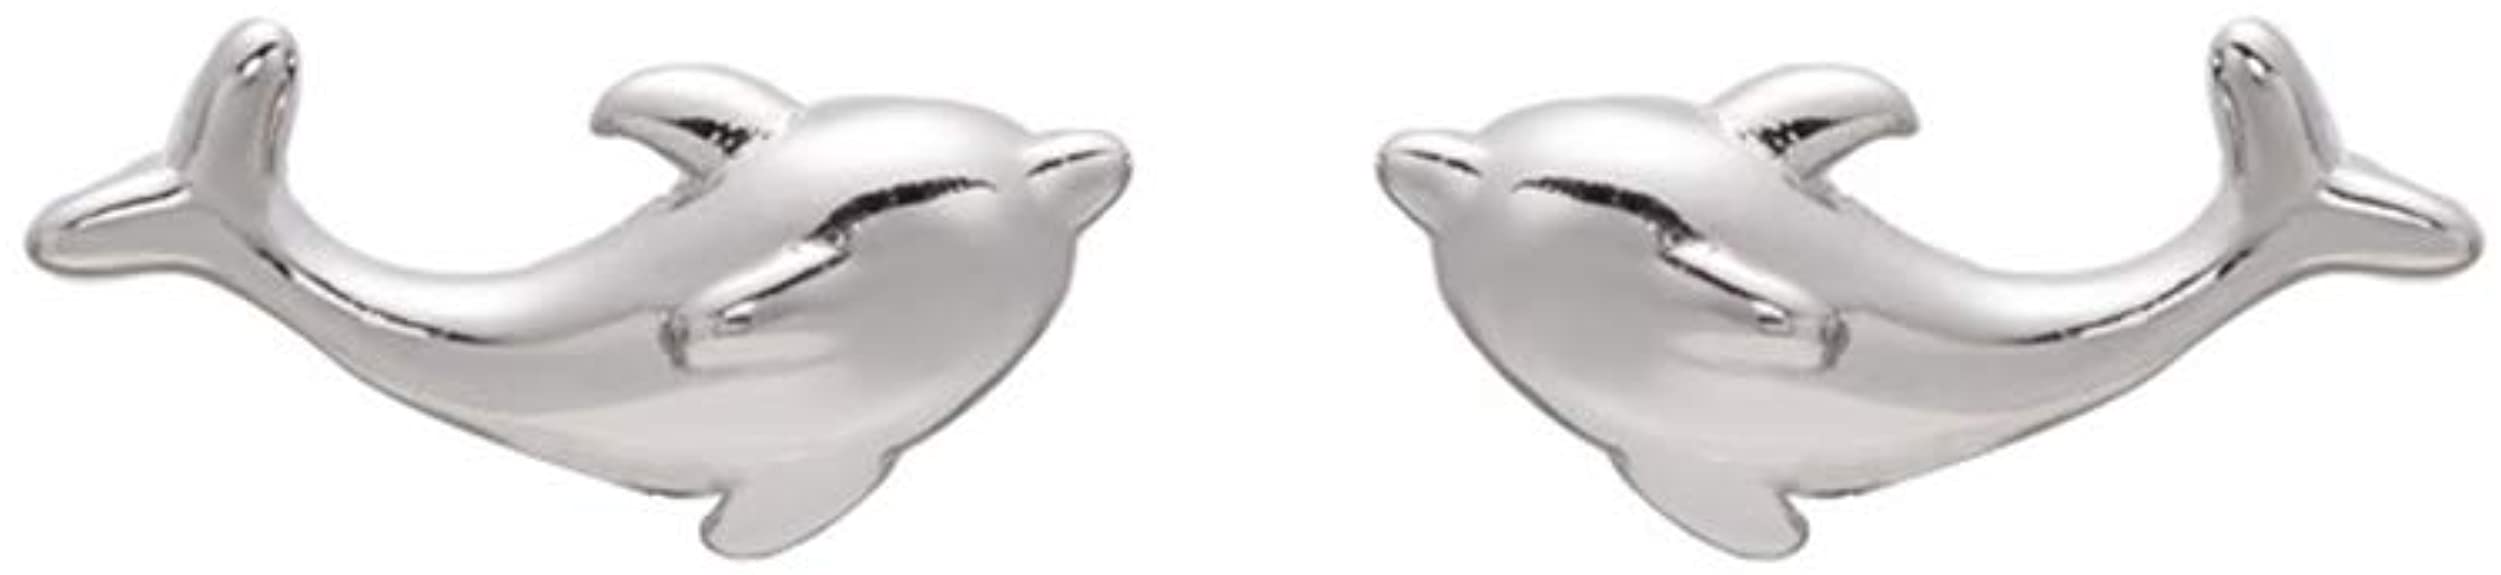 Cute Dolphin Tiny Stud Earrings 925 Sterling Silver Minimalist Animal Small Statement Earring Studs Posts for Little Girls Women Hypoallergenic